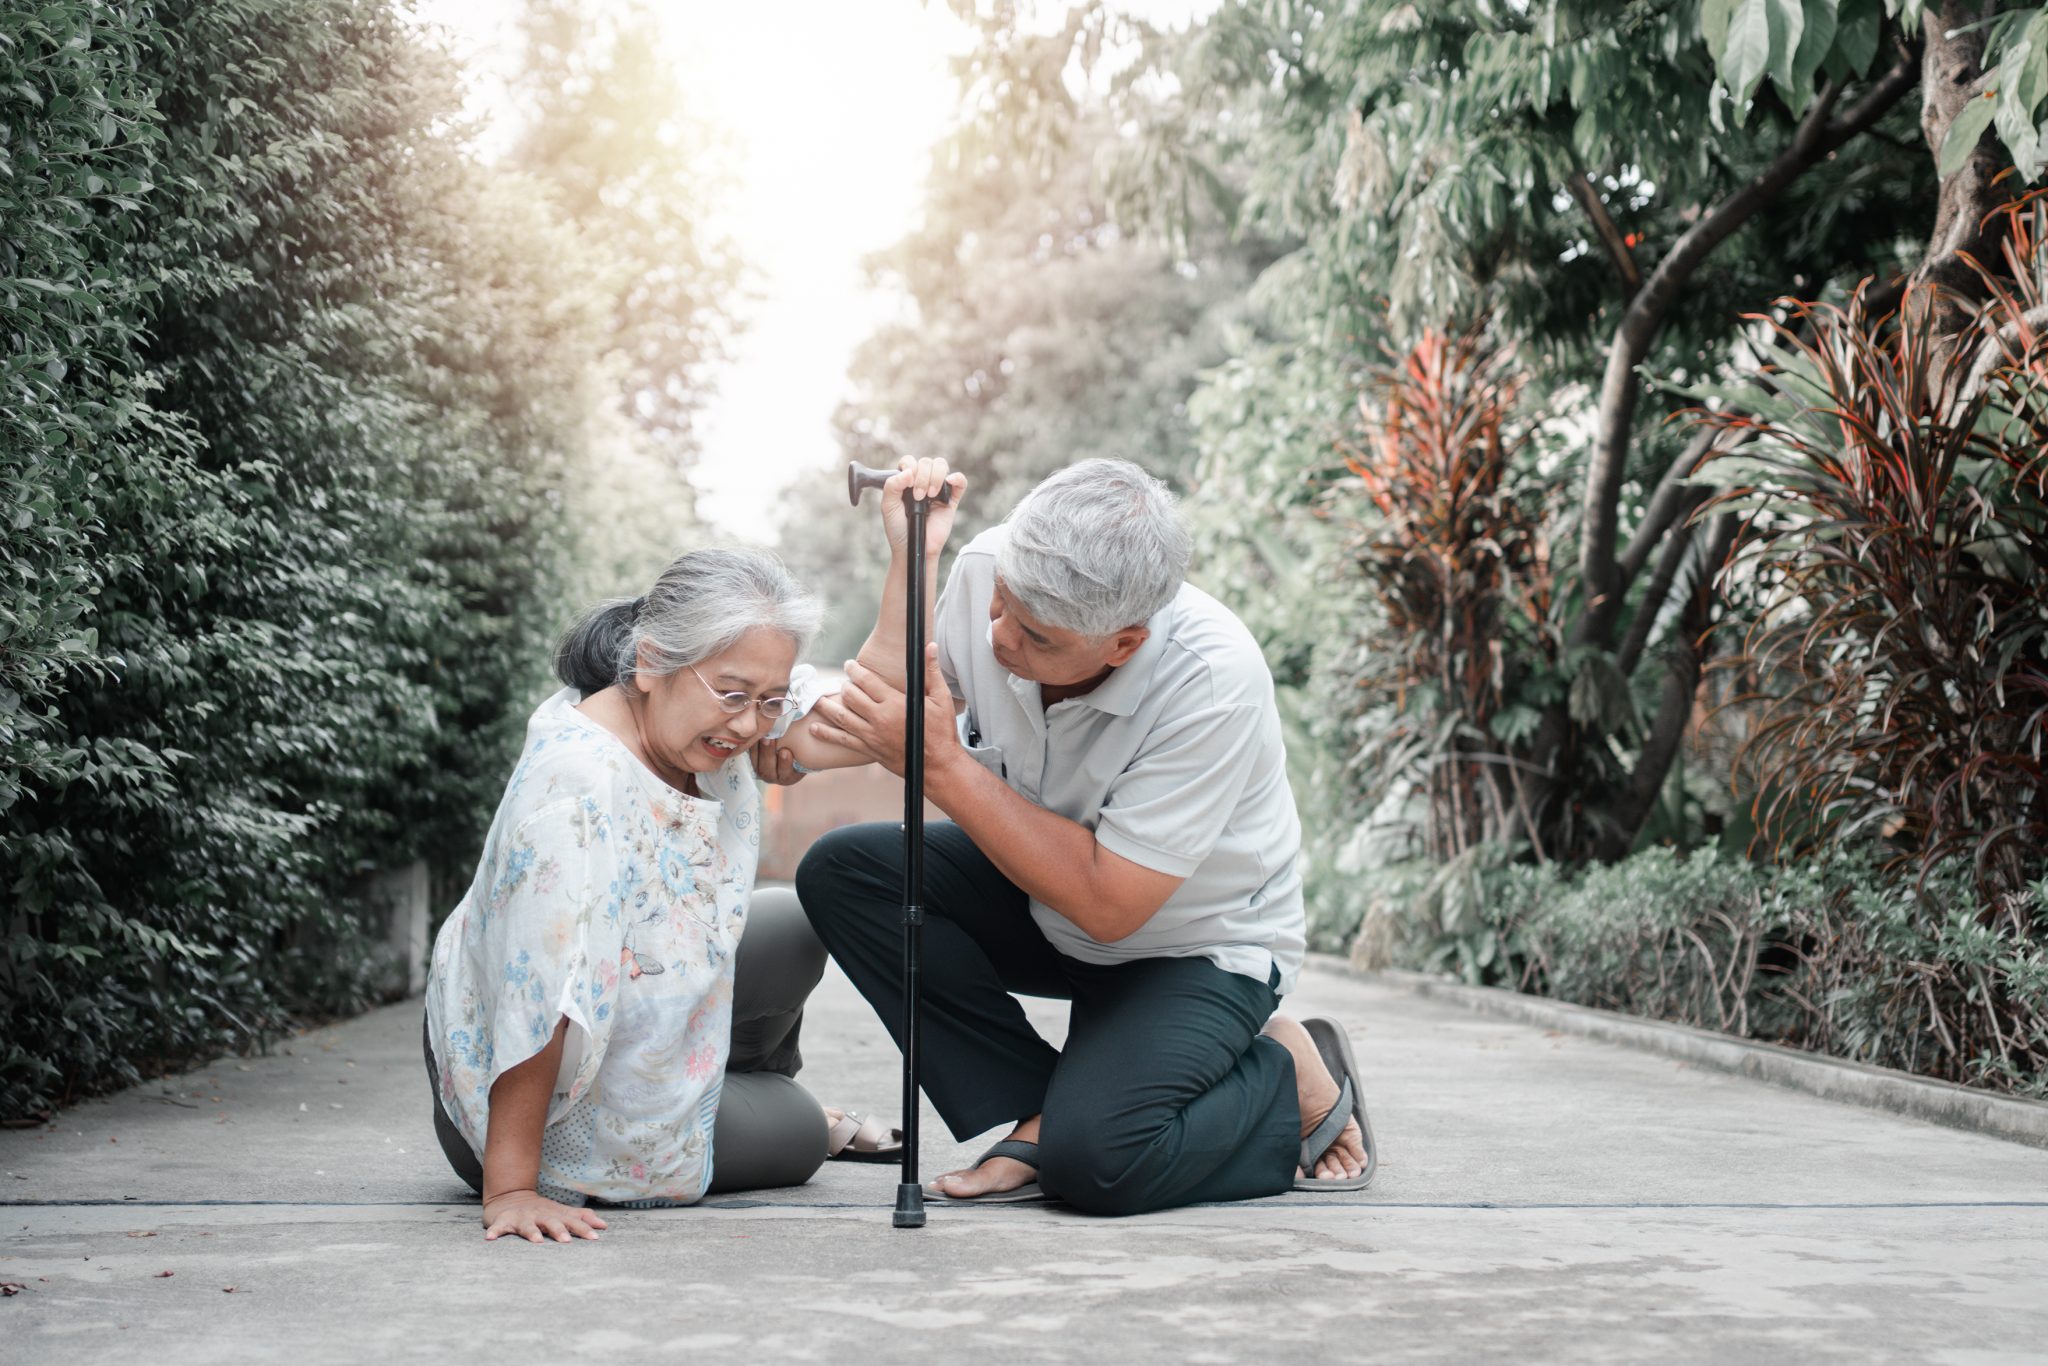 Asian senior woman falling down on lying floor at home after Stumbled at the doorstep and Crying in pain and her husband came to help support. Concept of old elderly insurance and health care